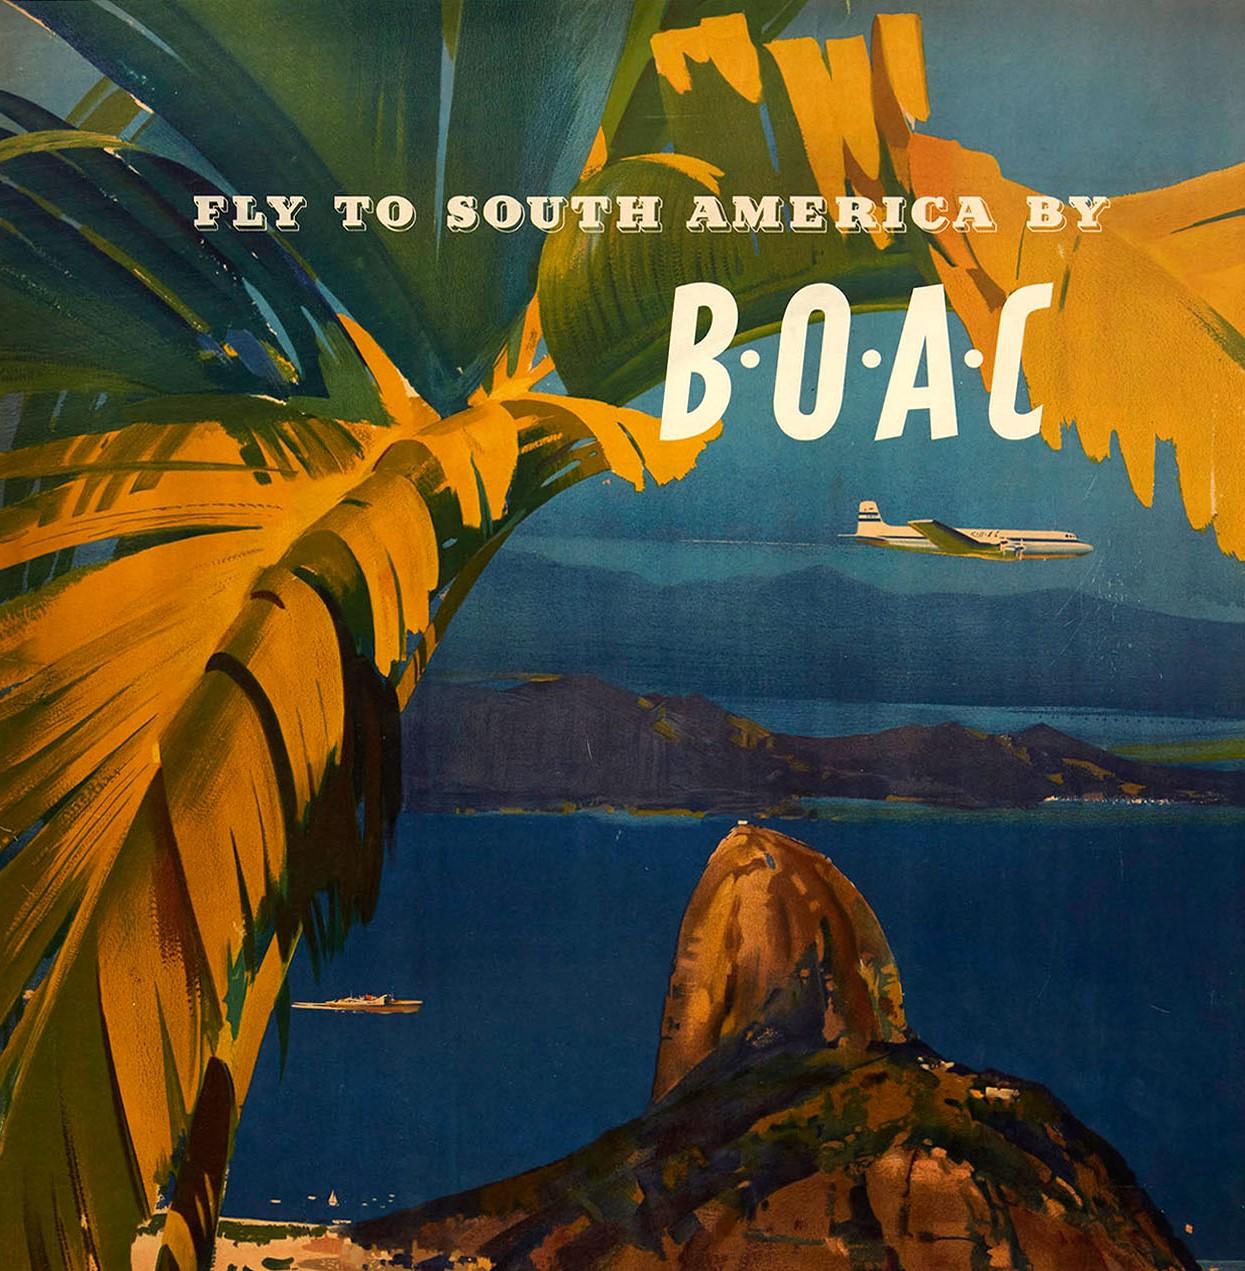 Original vintage travel poster - Fly to South America by BOAC - featuring a scenic view by the notable British artist Frank Wootton (1911-1998) over the city of Rio de Janeiro in Brazil dominated by Sugarloaf Mountain with sailing boats on Guanabara